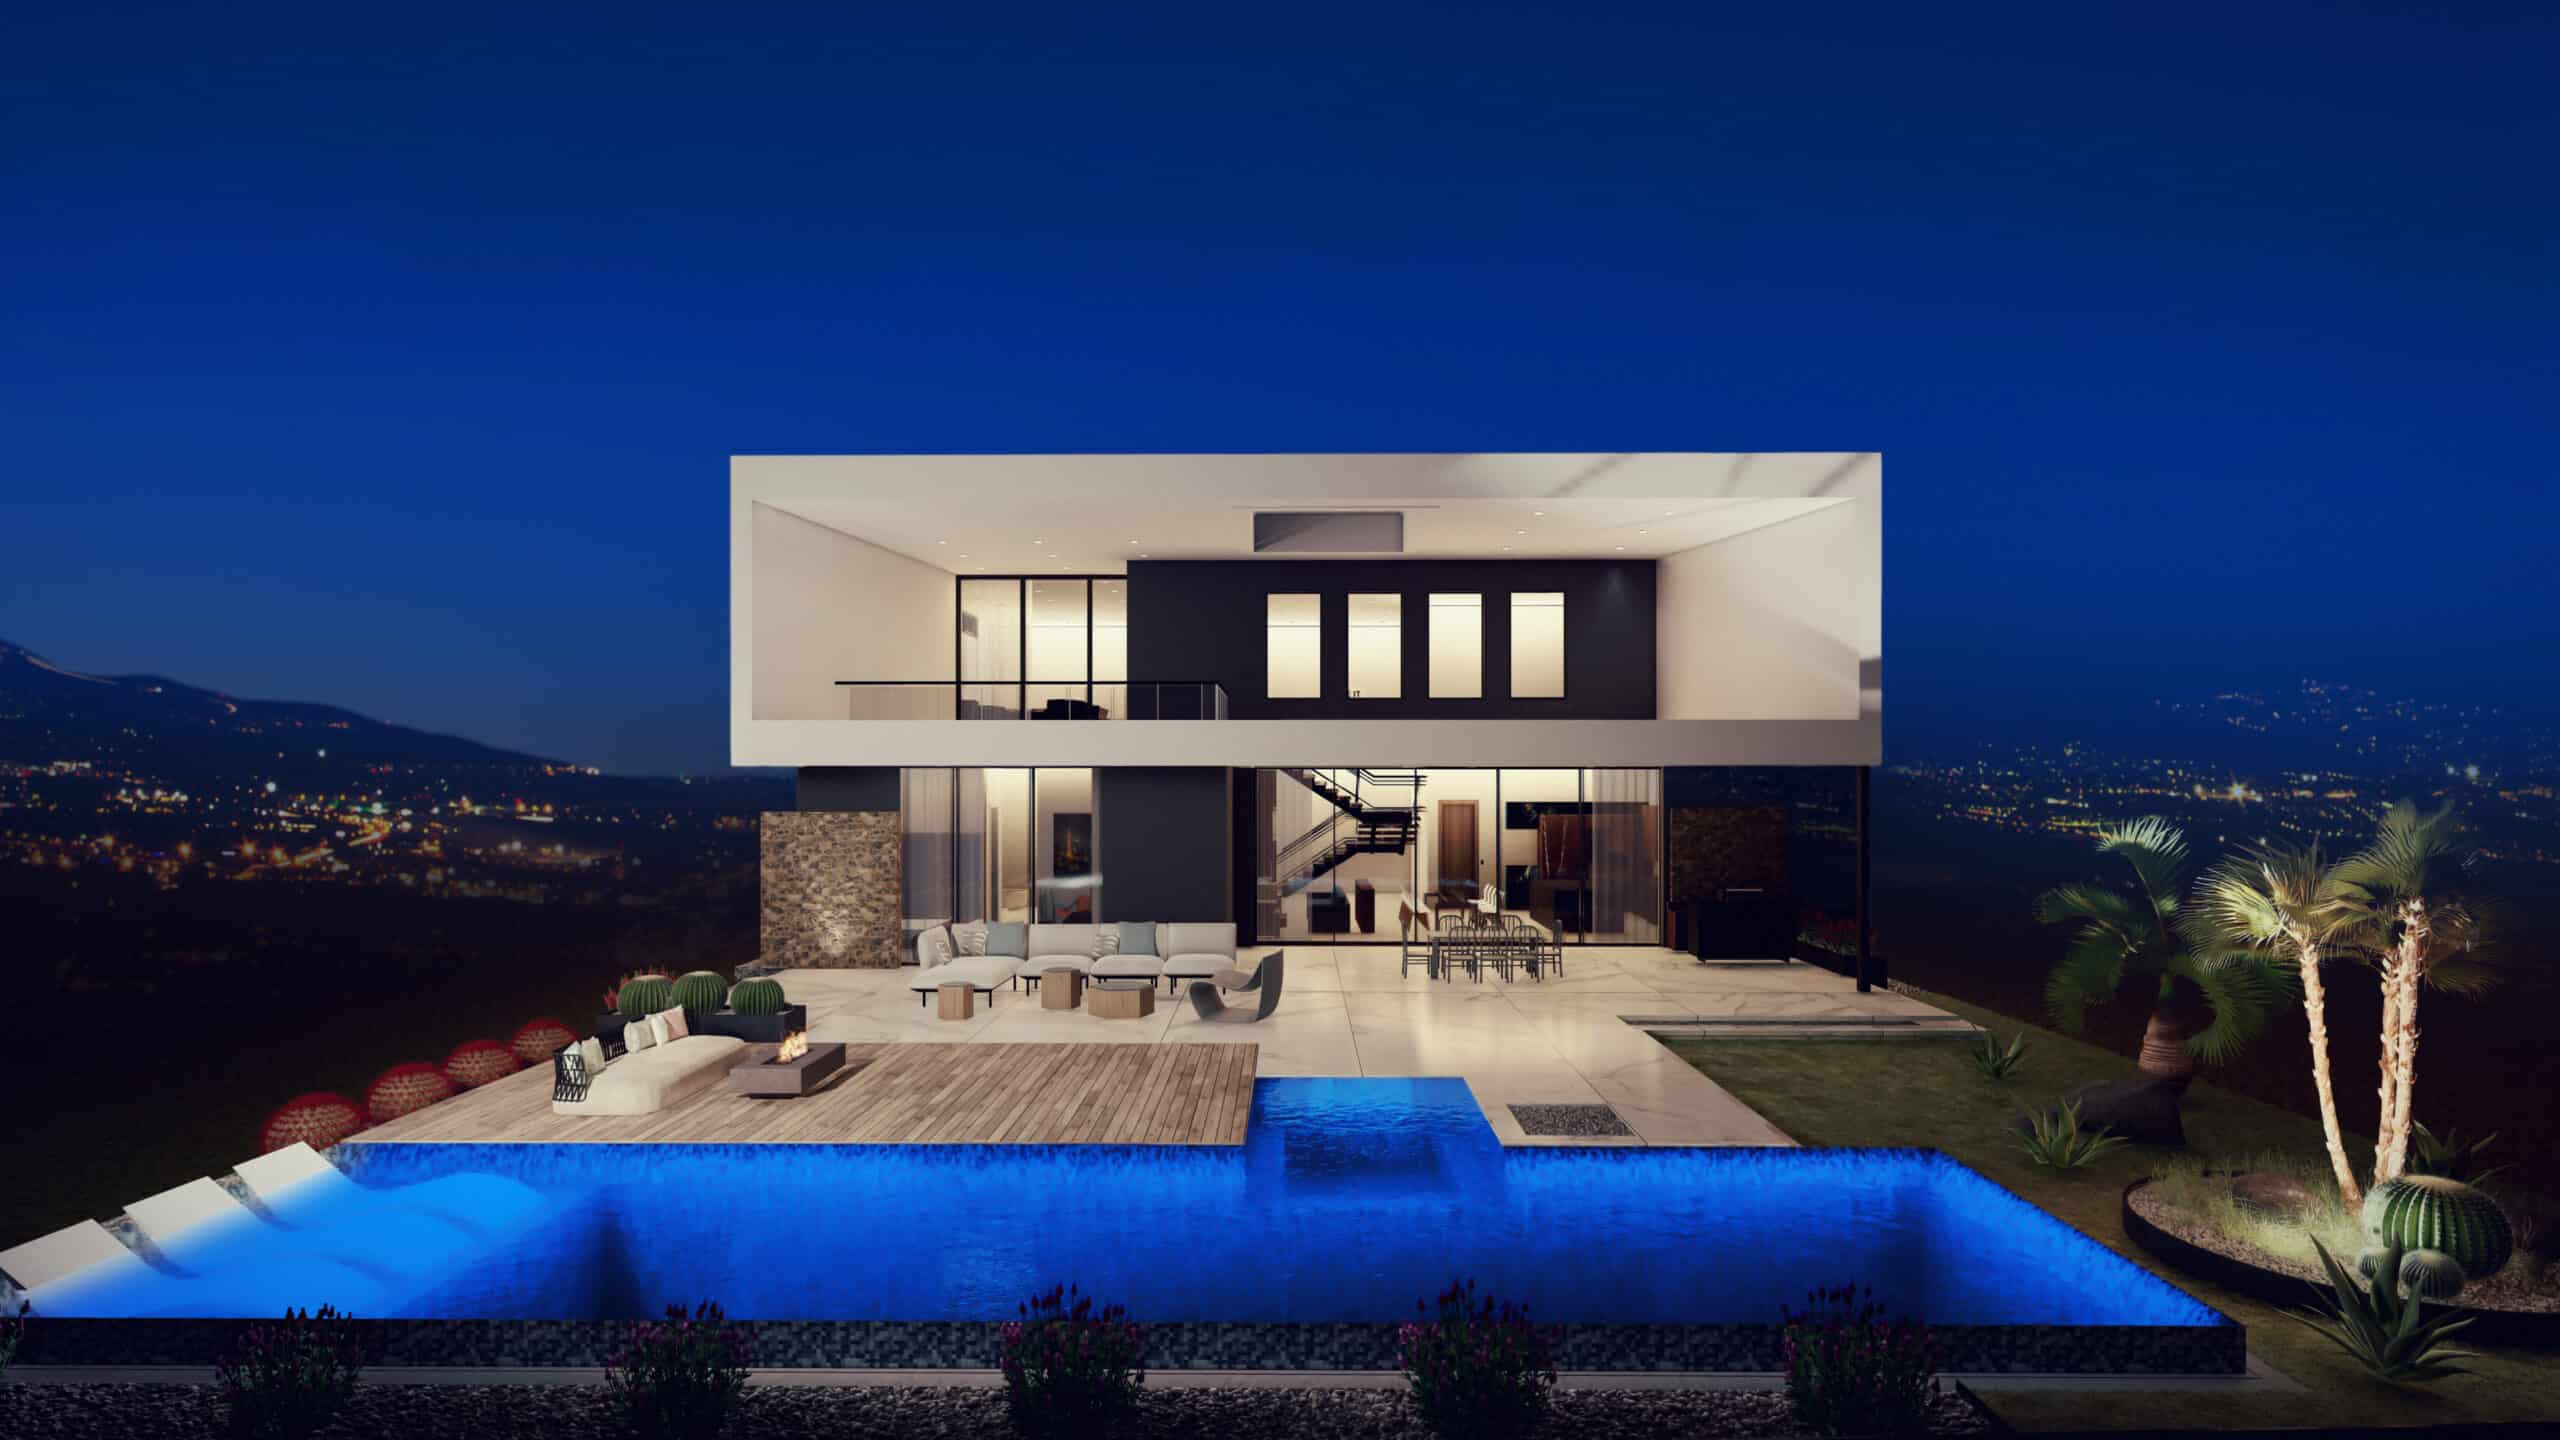 LIVV-homes-OurModels-paragon-Night-View-scaled.jpg